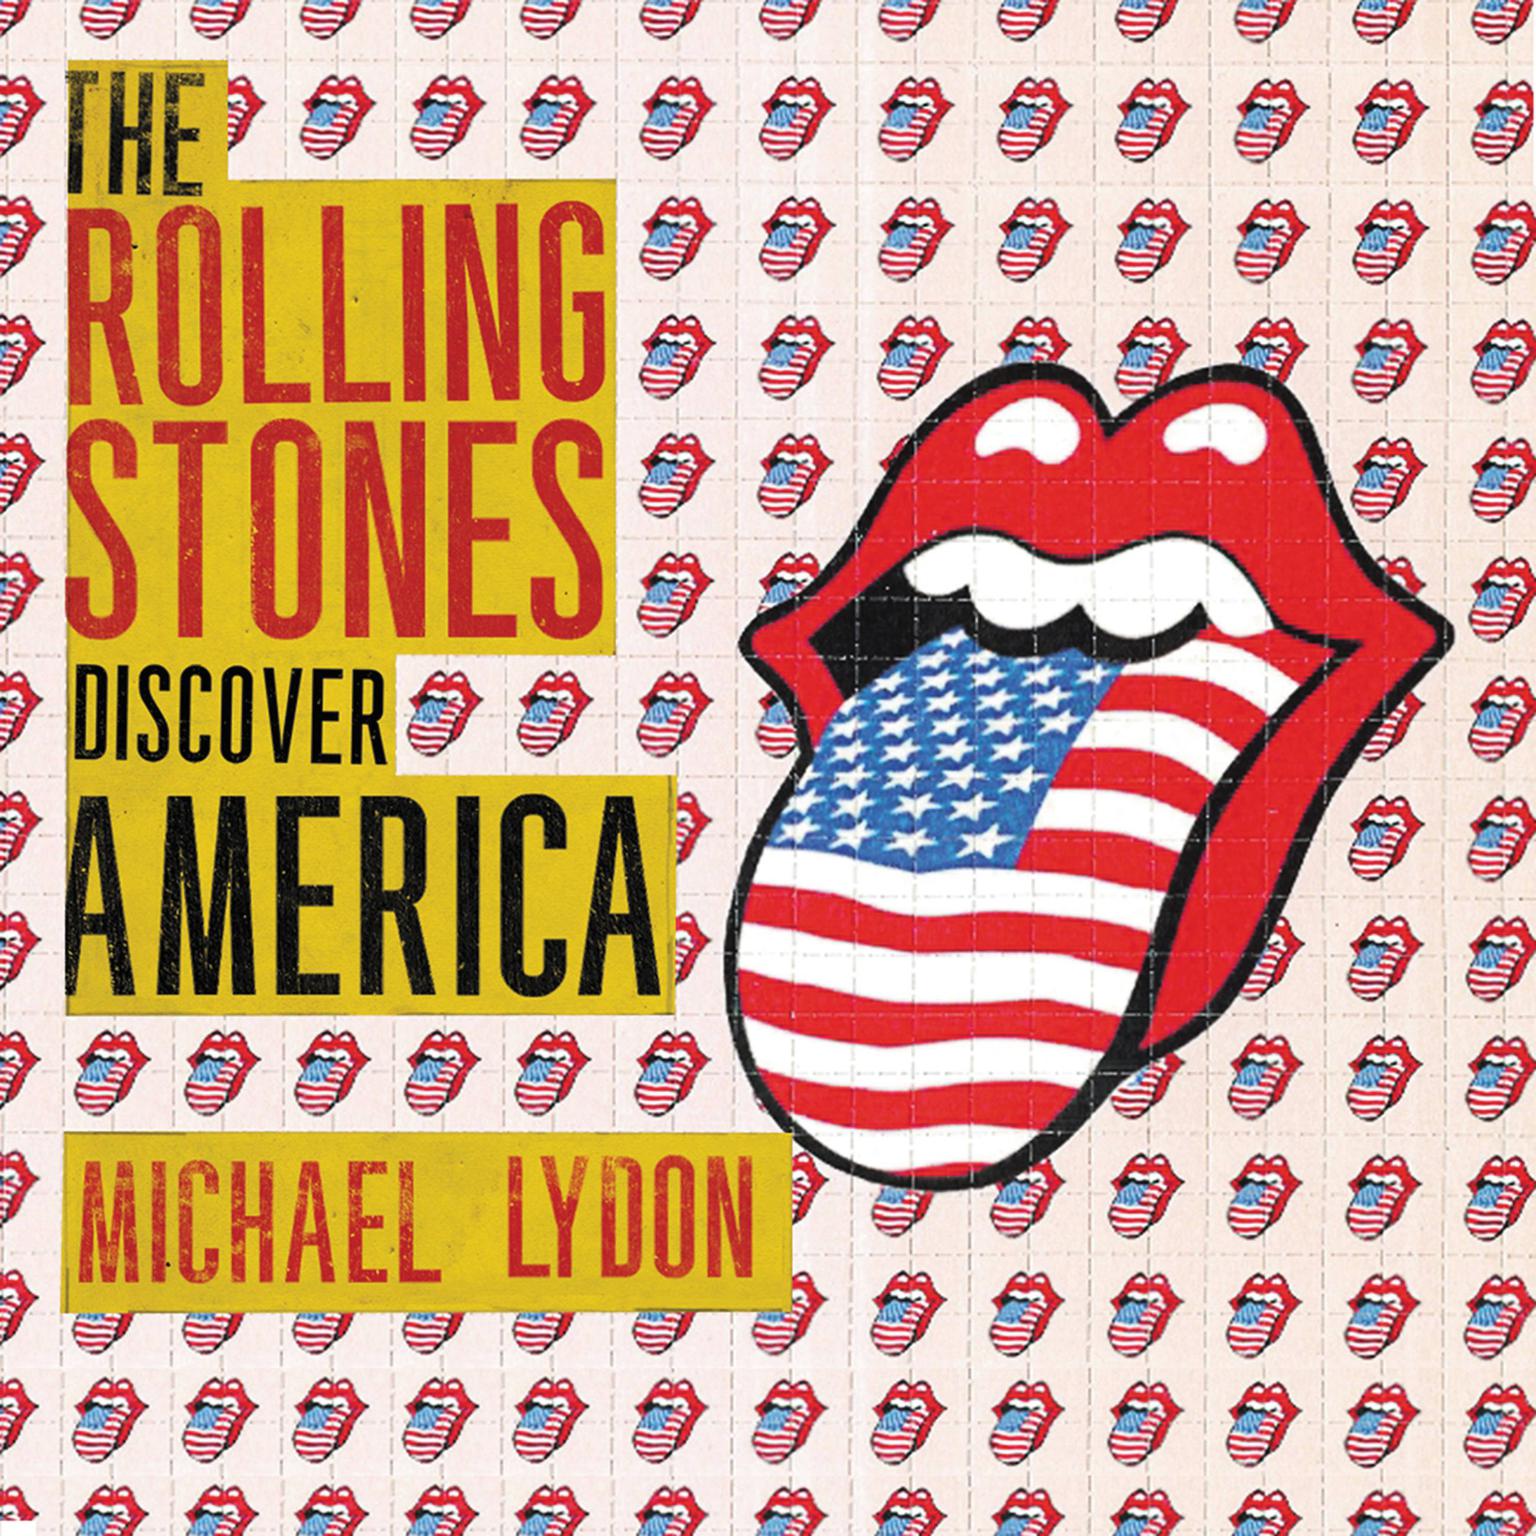 The Rolling Stones Discover America: Exclusive Inside Story of Their American Tour Audiobook, by Michael Lydon